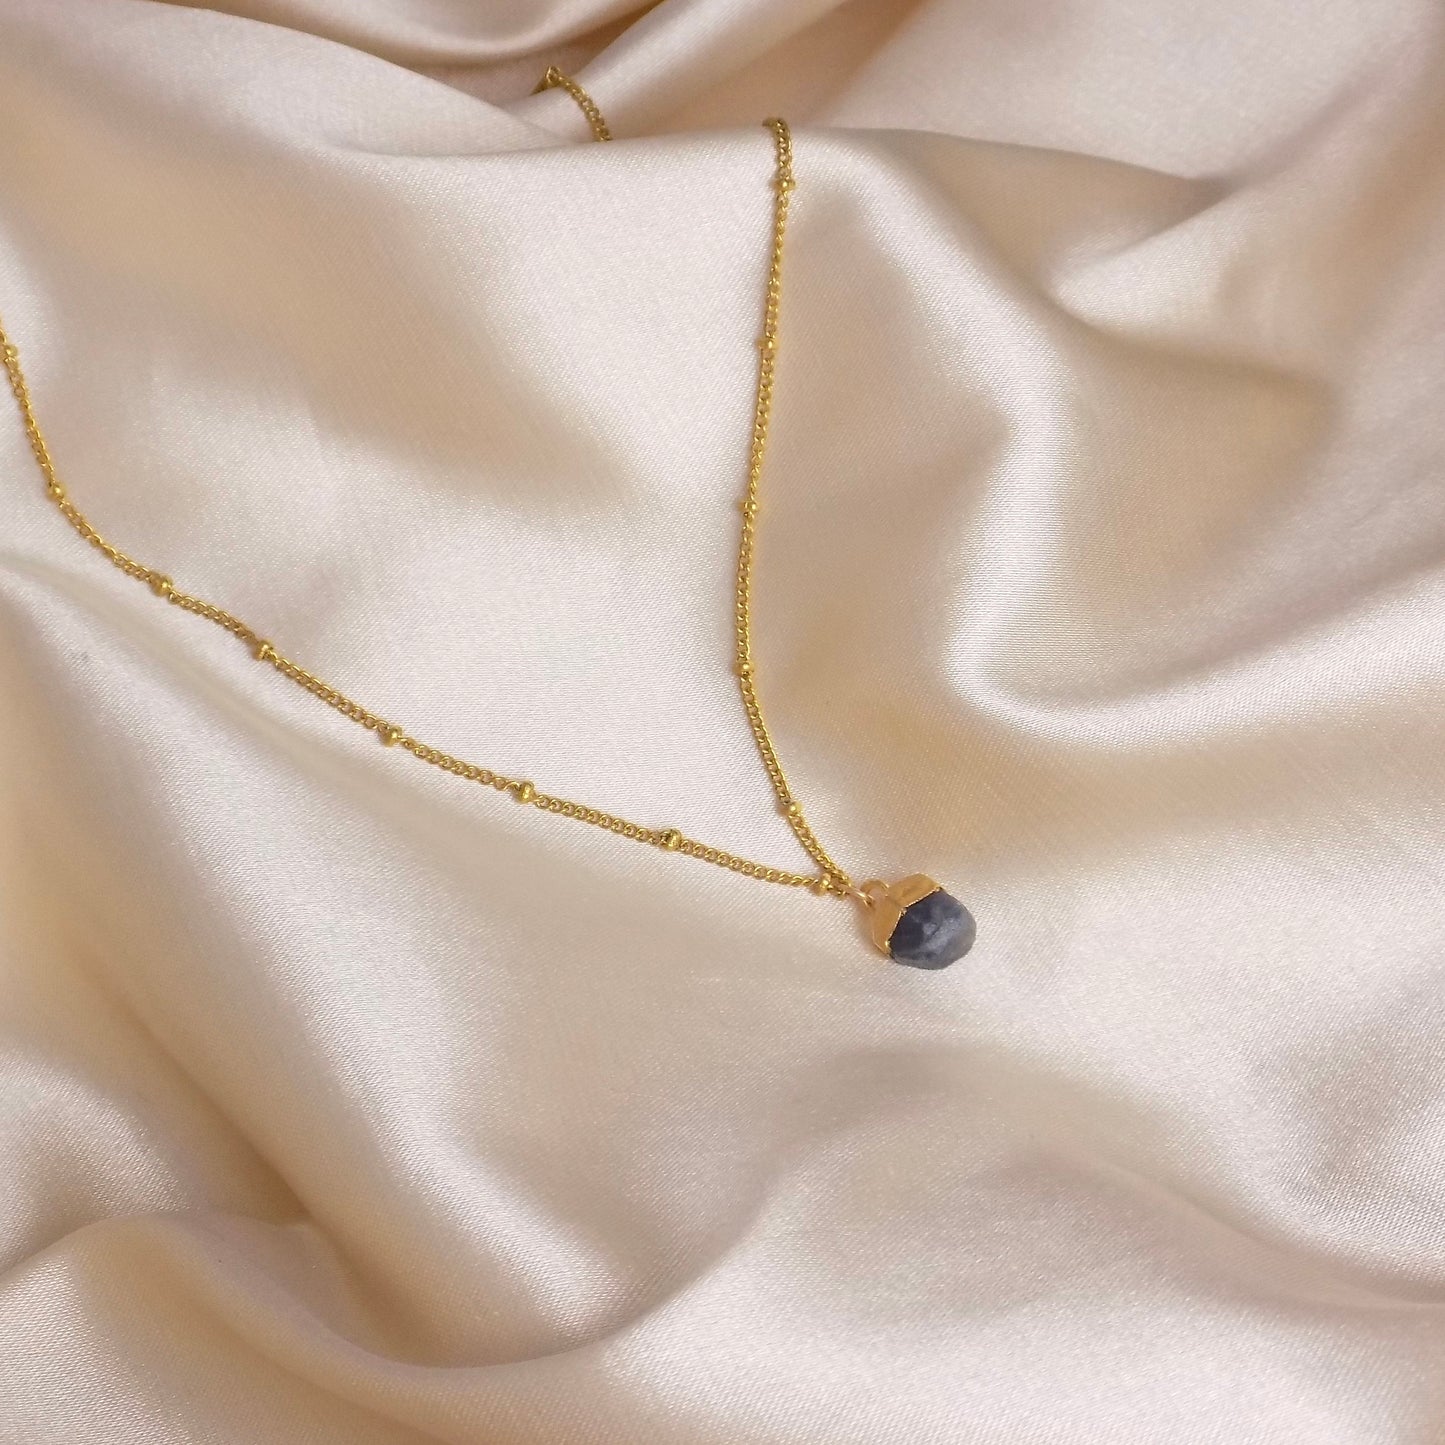 Small Raw Sapphire Satellite Chain Necklace, 18K Gold Stainless Steel, September Birthstone Gift, G15-146